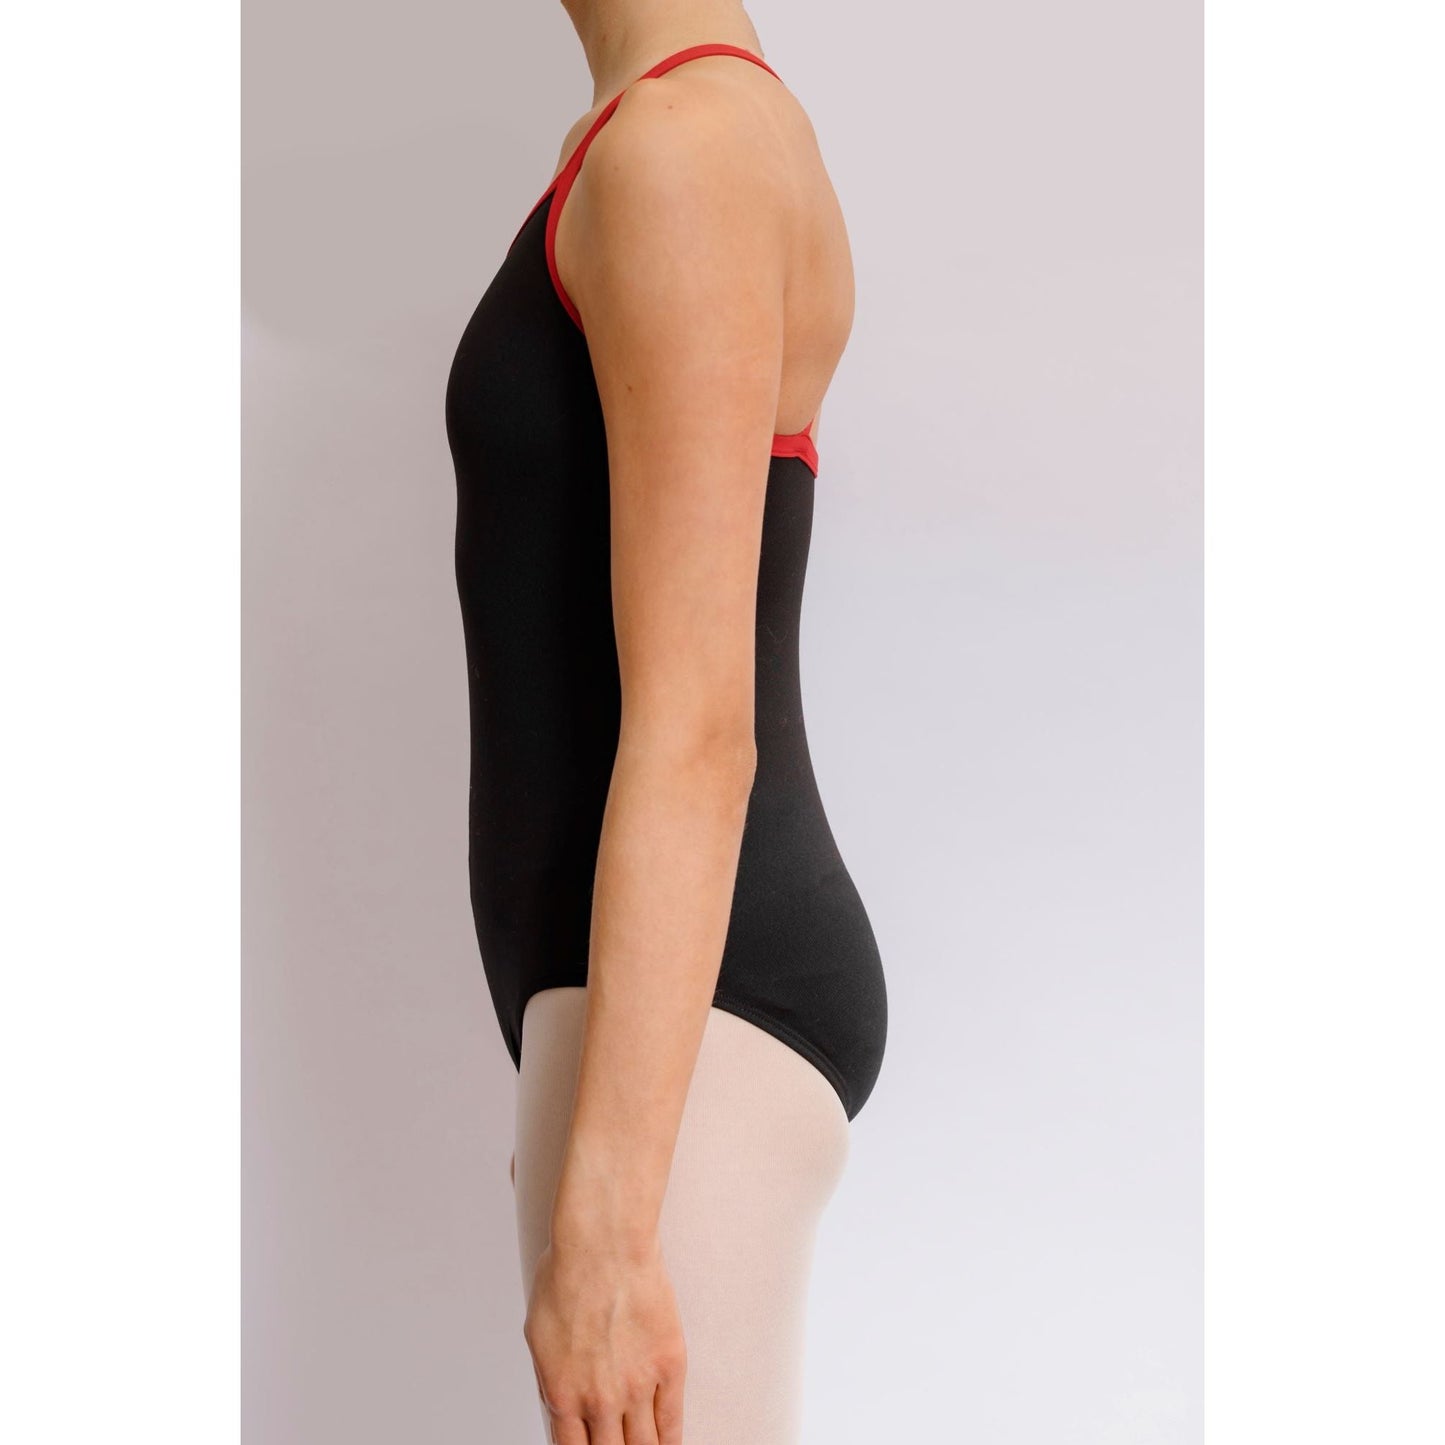 Maddison leotard with red detail